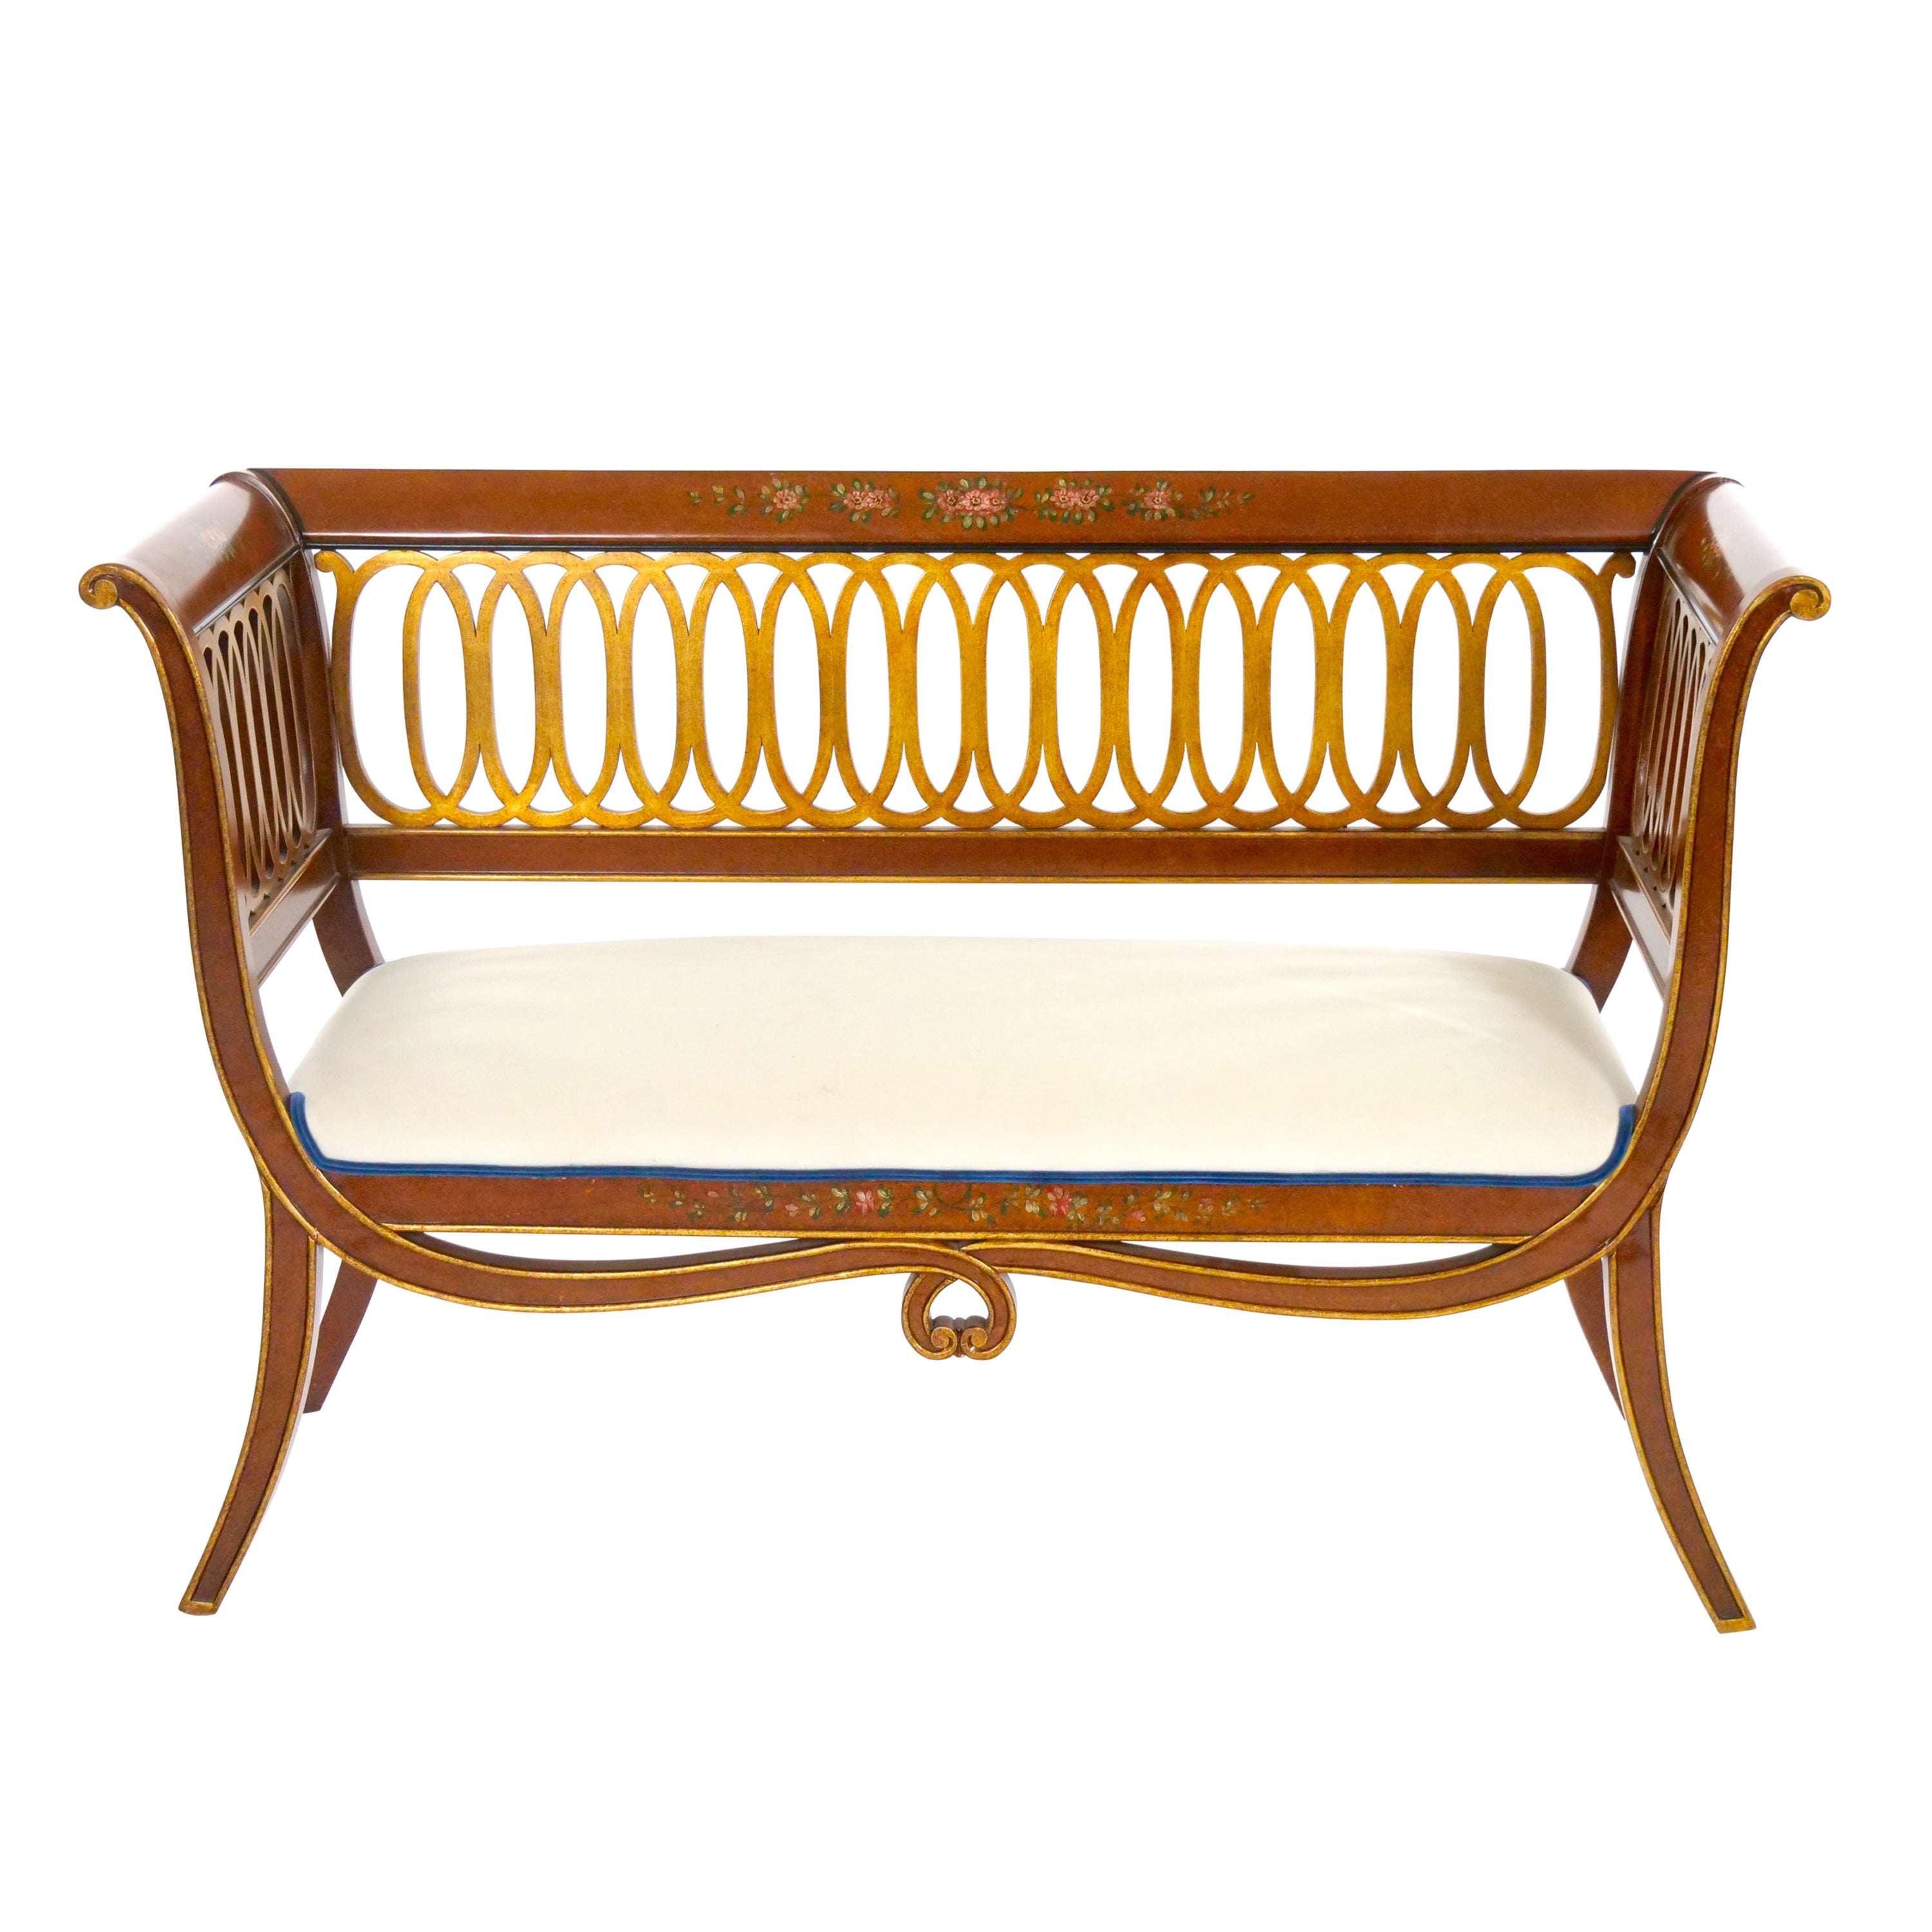 Hand-Painted & Partially Gilt Adams Style Small Settee For Sale